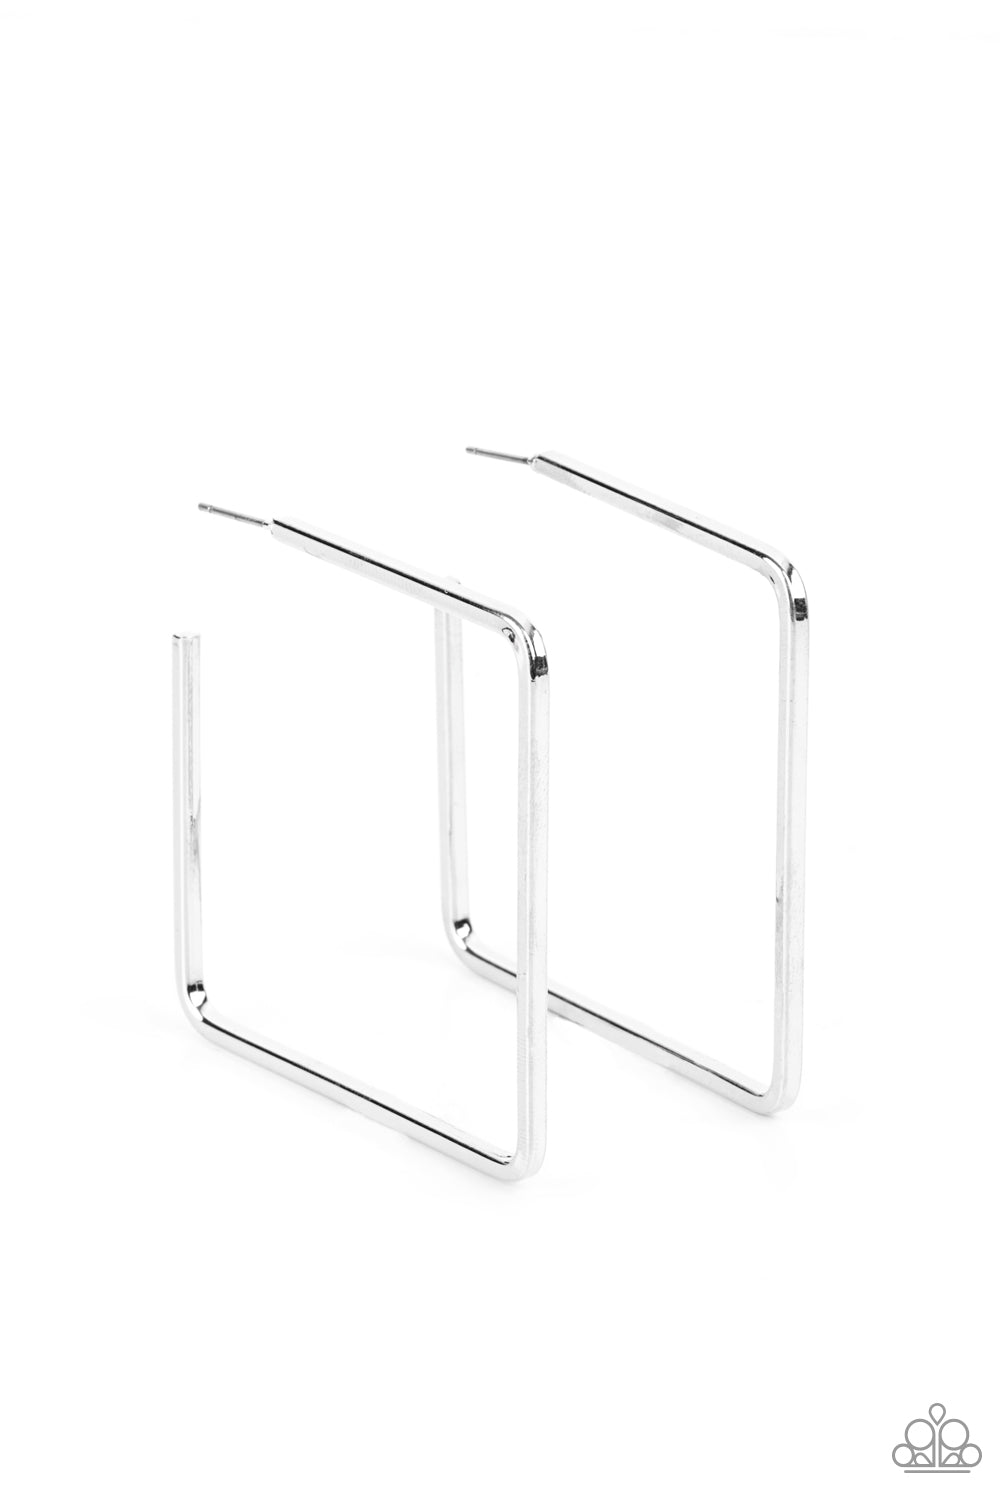 A deceptively simple square frame is tilted on point to create a geometric hoop. Its sharp angles are complemented by its shiny silver finish, making a lasting impression. Earring attaches to a standard post fitting. Hoop measures approximately 2